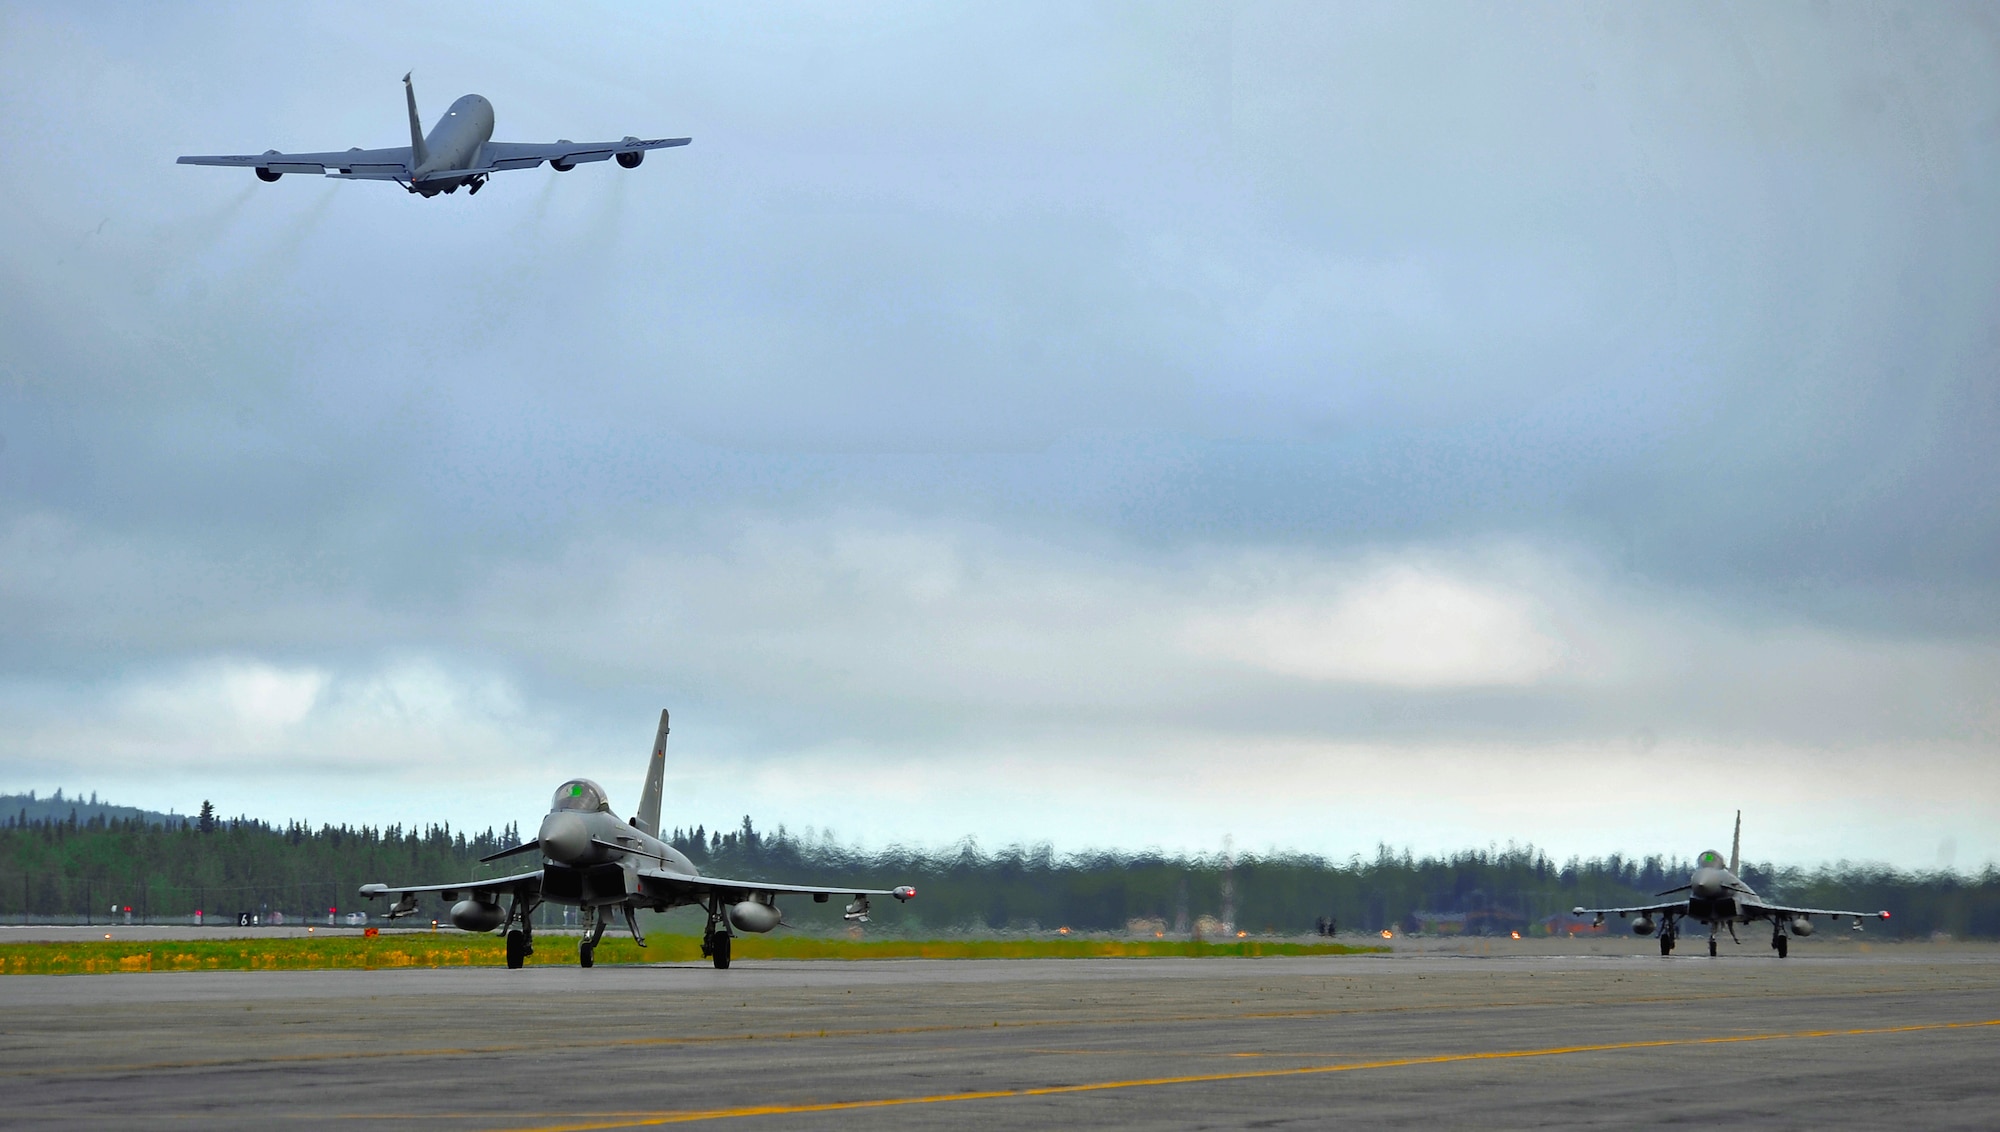 Two German air force Eurofighter Typhoons taxi the runway as a KC-135R Stratotanker launches from the runway during RED FLAG-Alaska 12-2 June 11, 2012, Eielson Air Force Base, Alaska.  This is the first time the Typhoon has participated in RF-A.  The KC-135R Stratotanker is assigned to the 22nd Air Refueling Wing, McConnell Air Force Base, Kan.  (U.S. Air Force photo/Staff Sgt. Miguel Lara III)